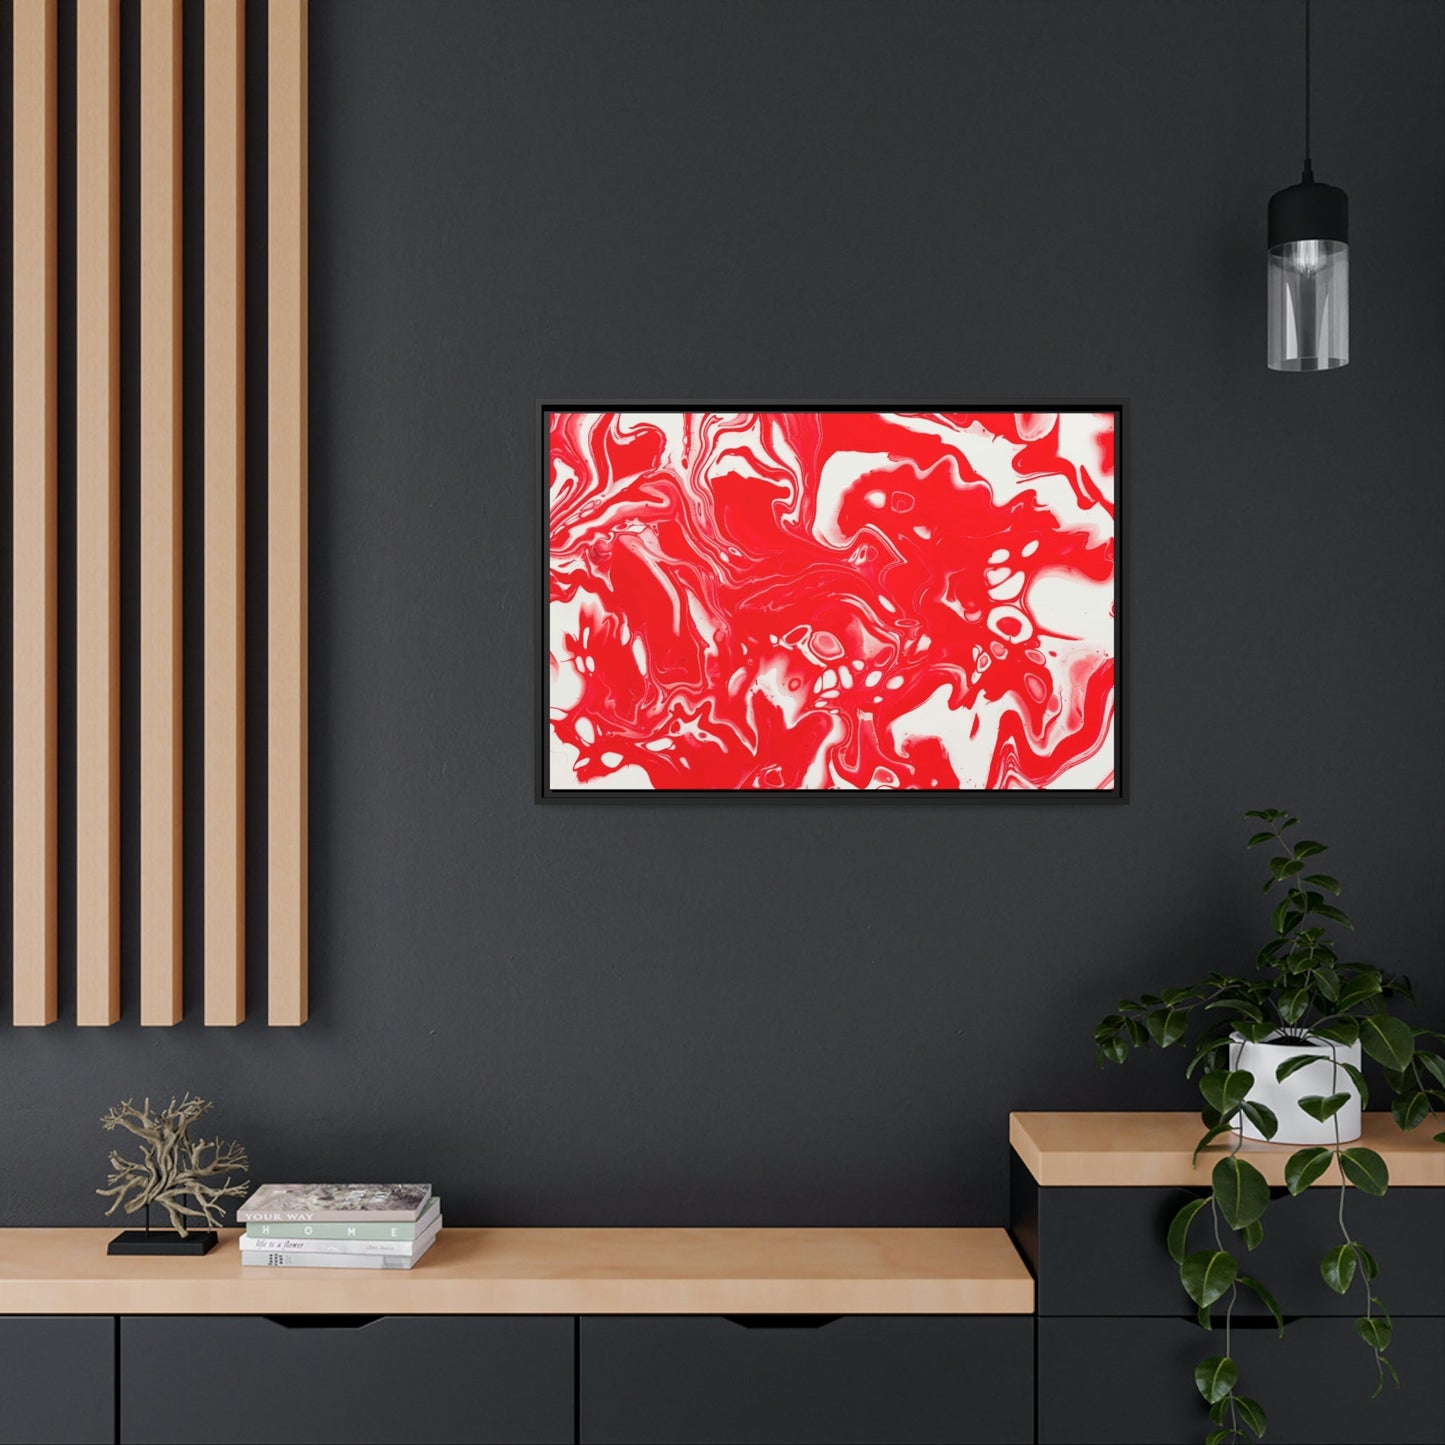 Capturing Emotion in Art: Red Abstract Prints and Canvas Wall Art